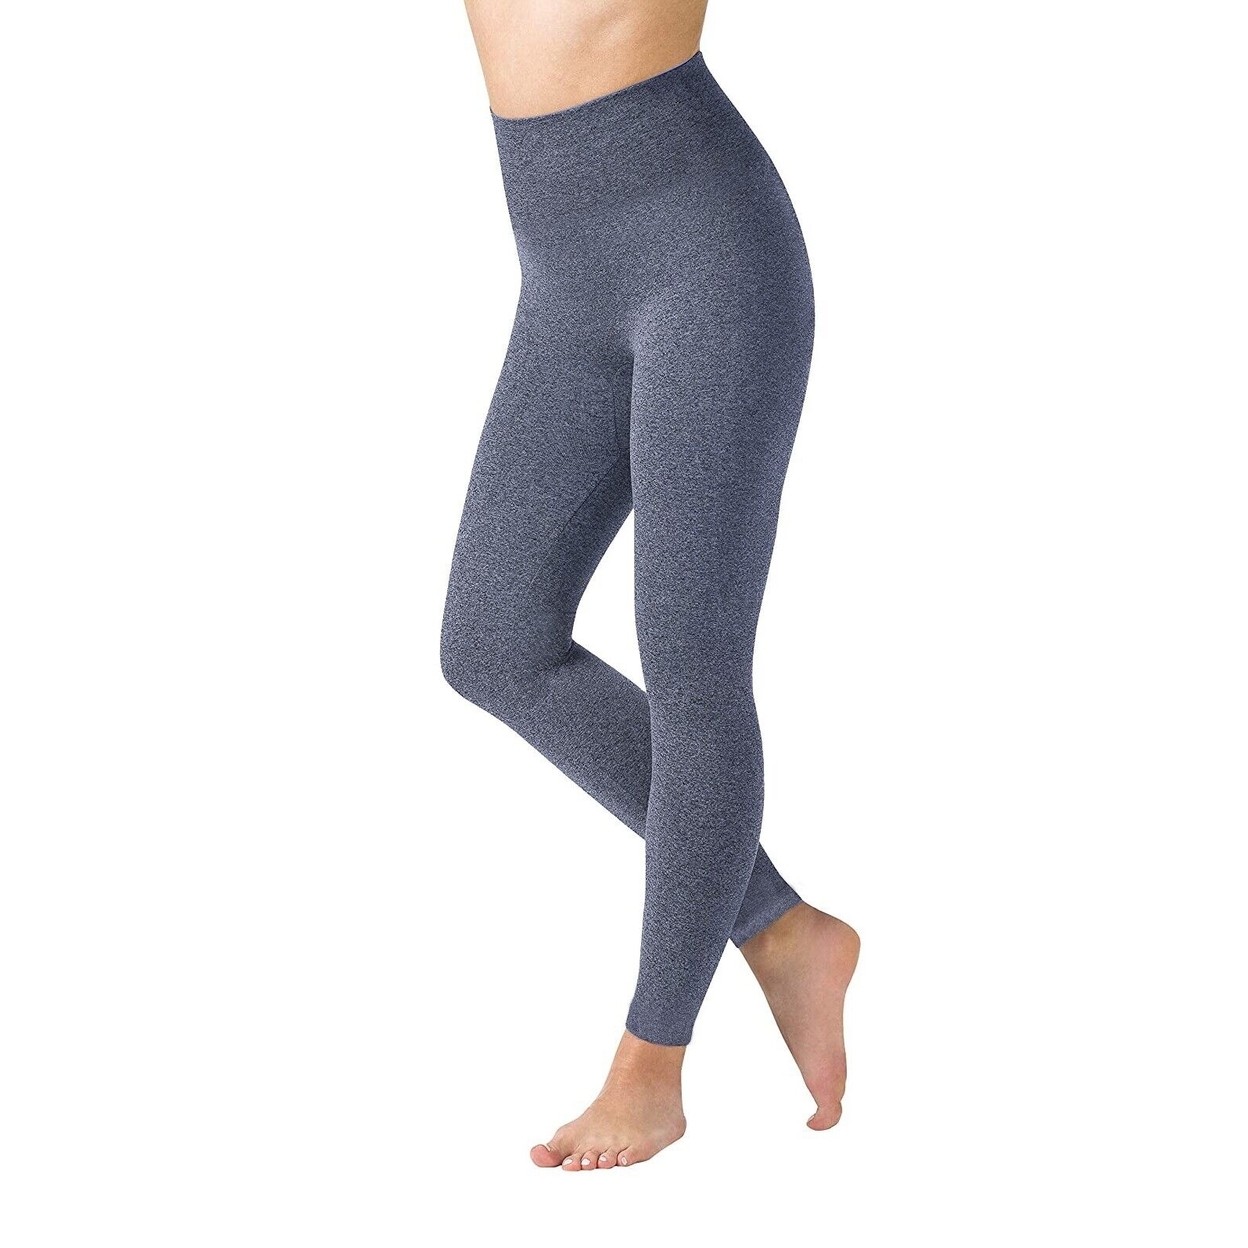 Multi-Packs Women High Waisted Fleece Lined Marled Leggings Ultra Soft Warm Pant - Charcoal/charcoal, 2, X-large